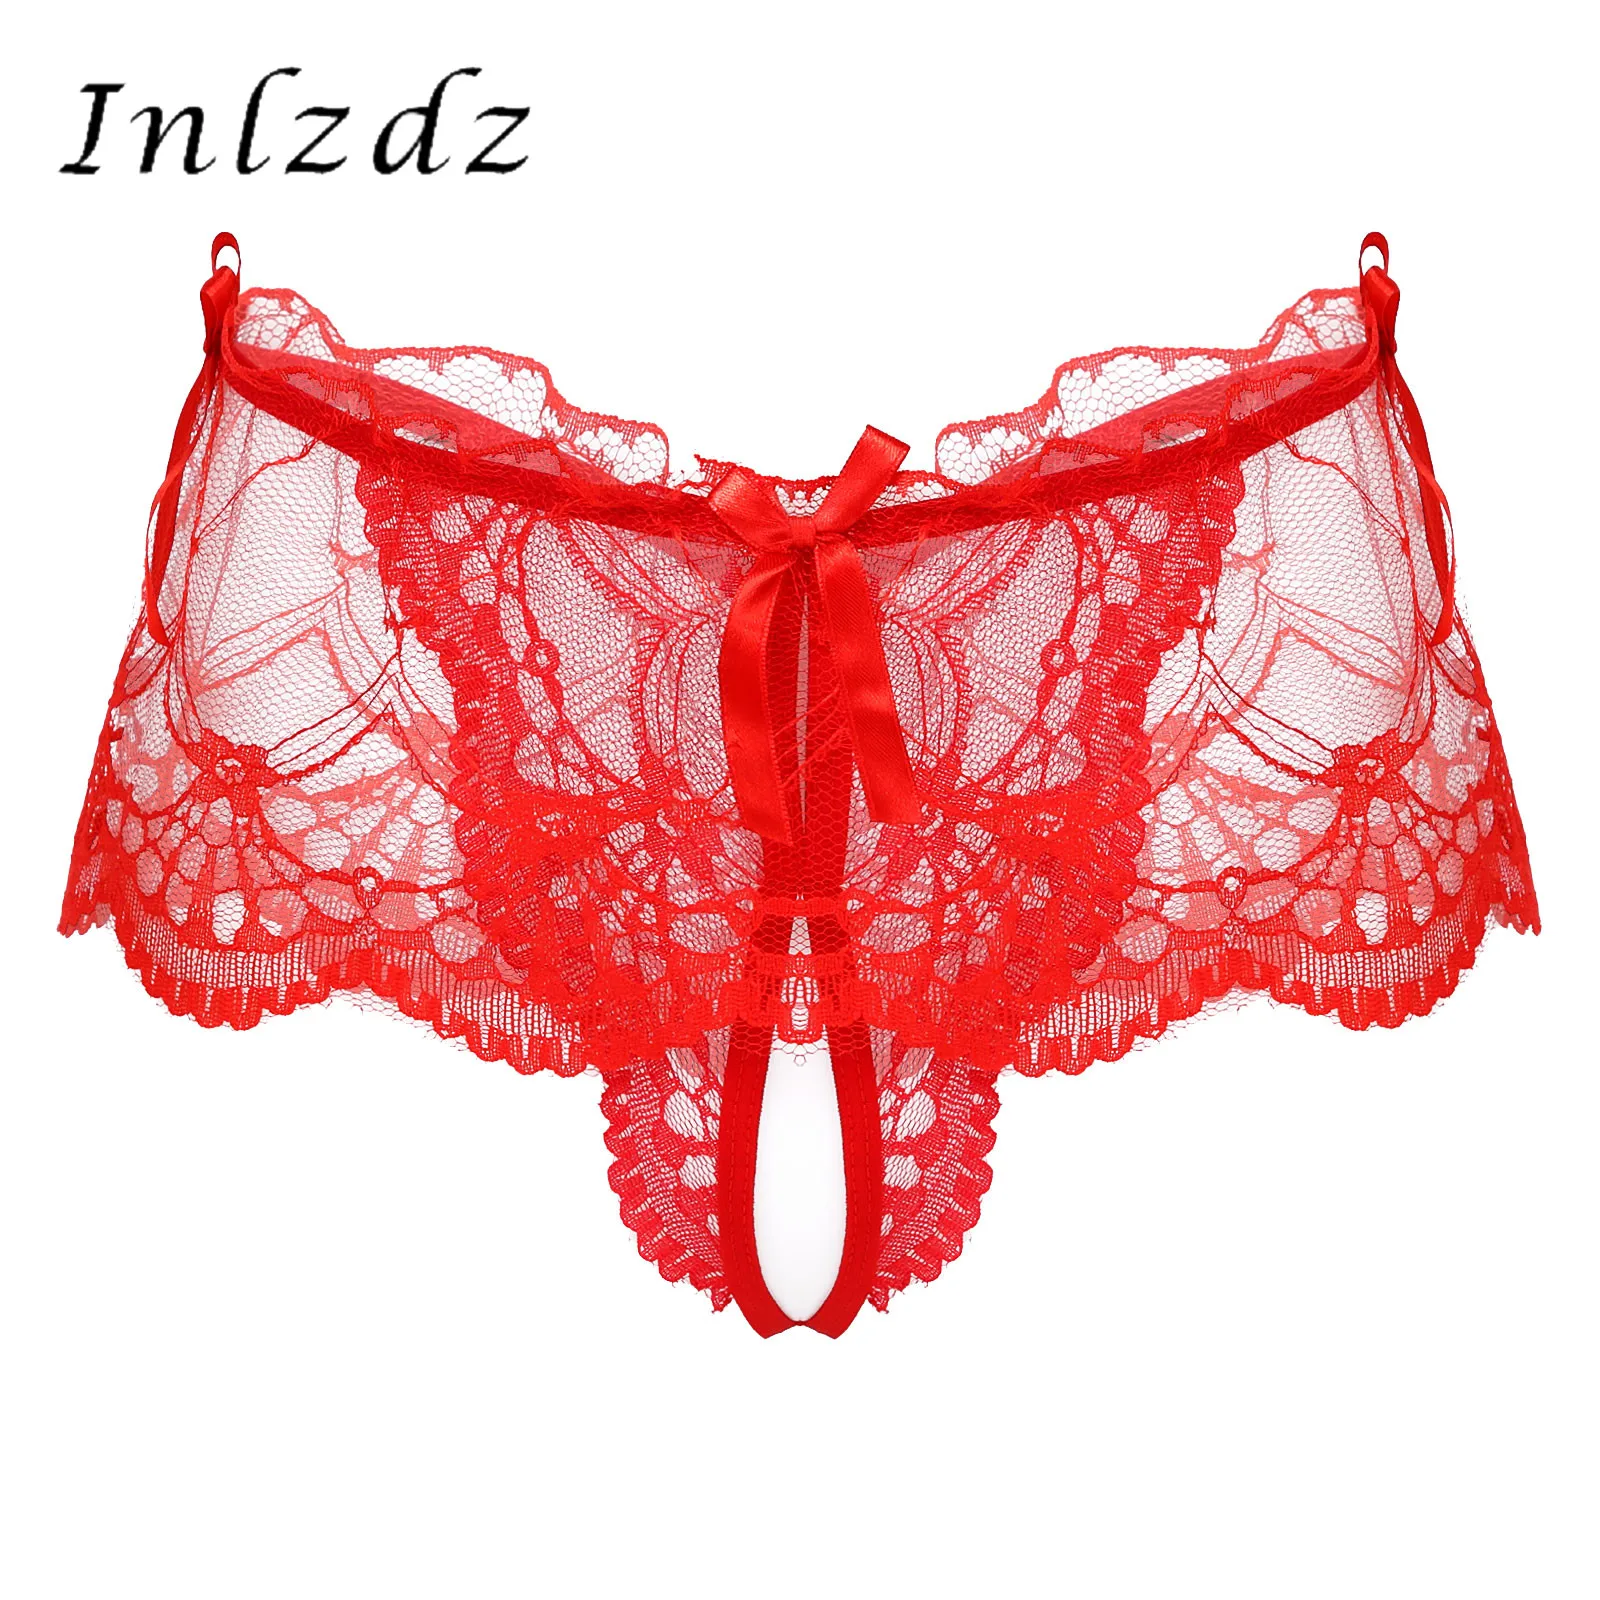 

Mens Erotic Lingerie Sissy Lace Underwear See-through Crotchless Skirted Thong T-back Panties Bowknot G-string Briefs Underpants